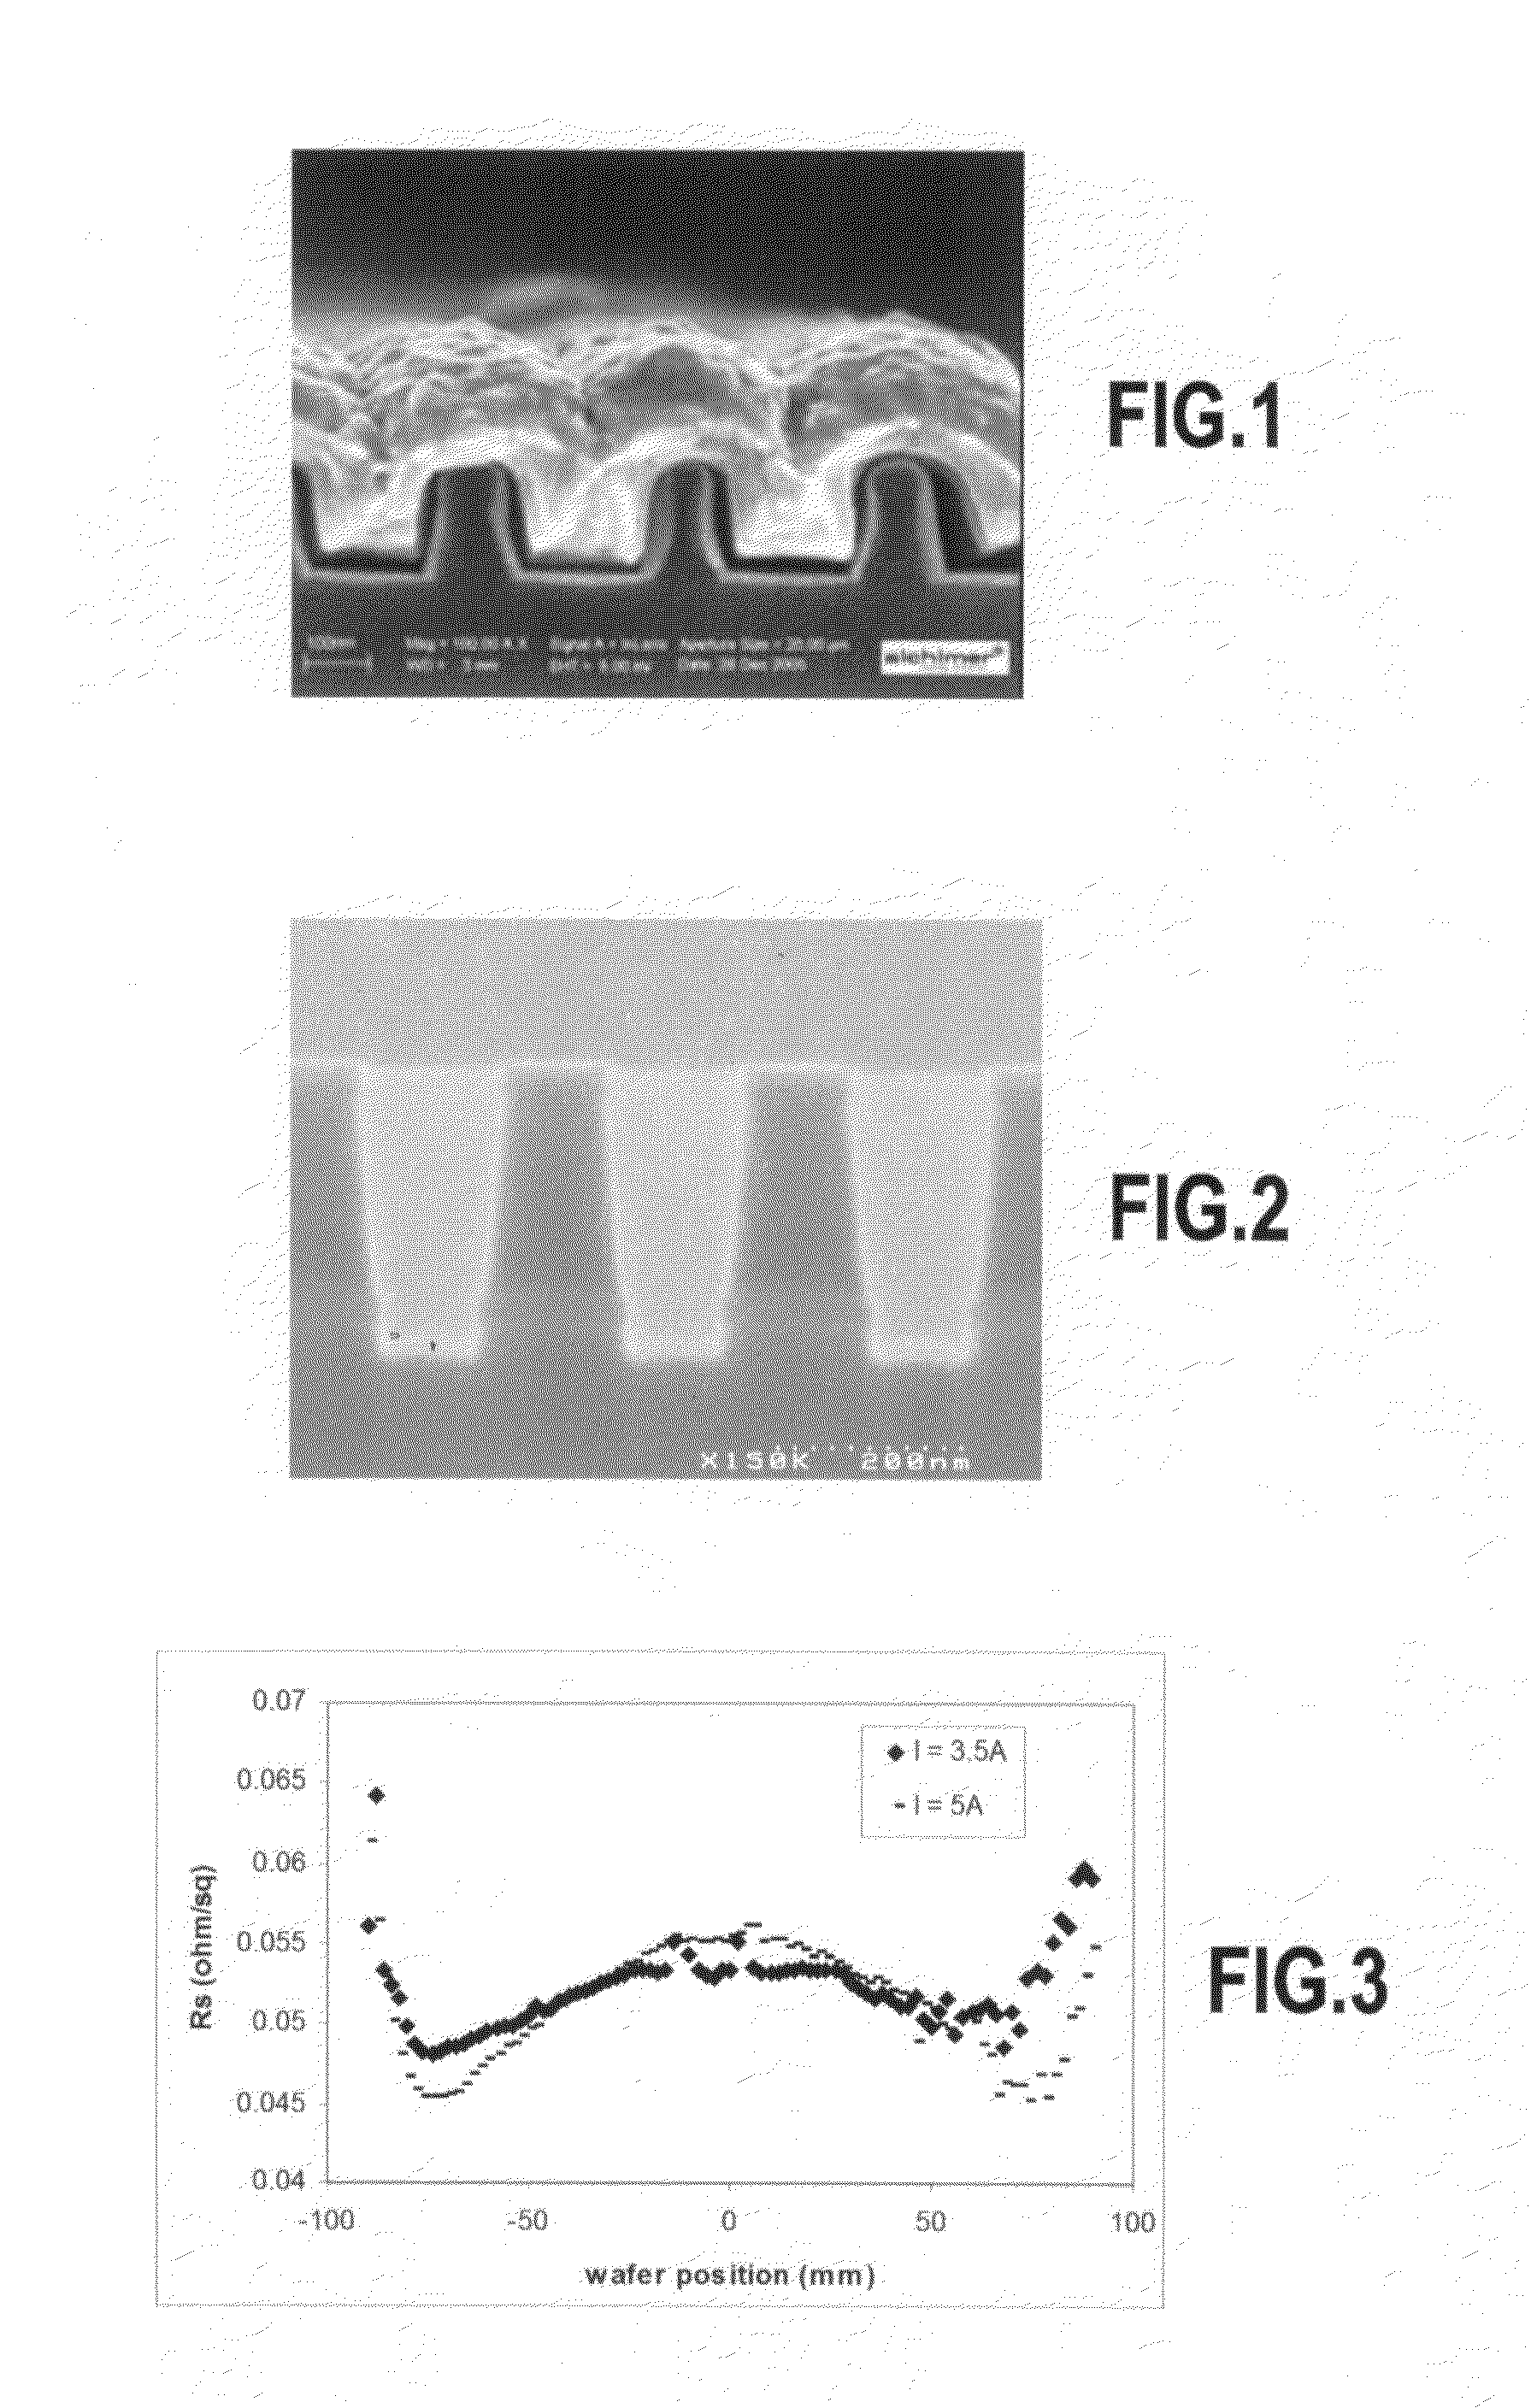 Method and compositions for direct copper plating and filing to form interconnects in the fabrication of semiconductor devices